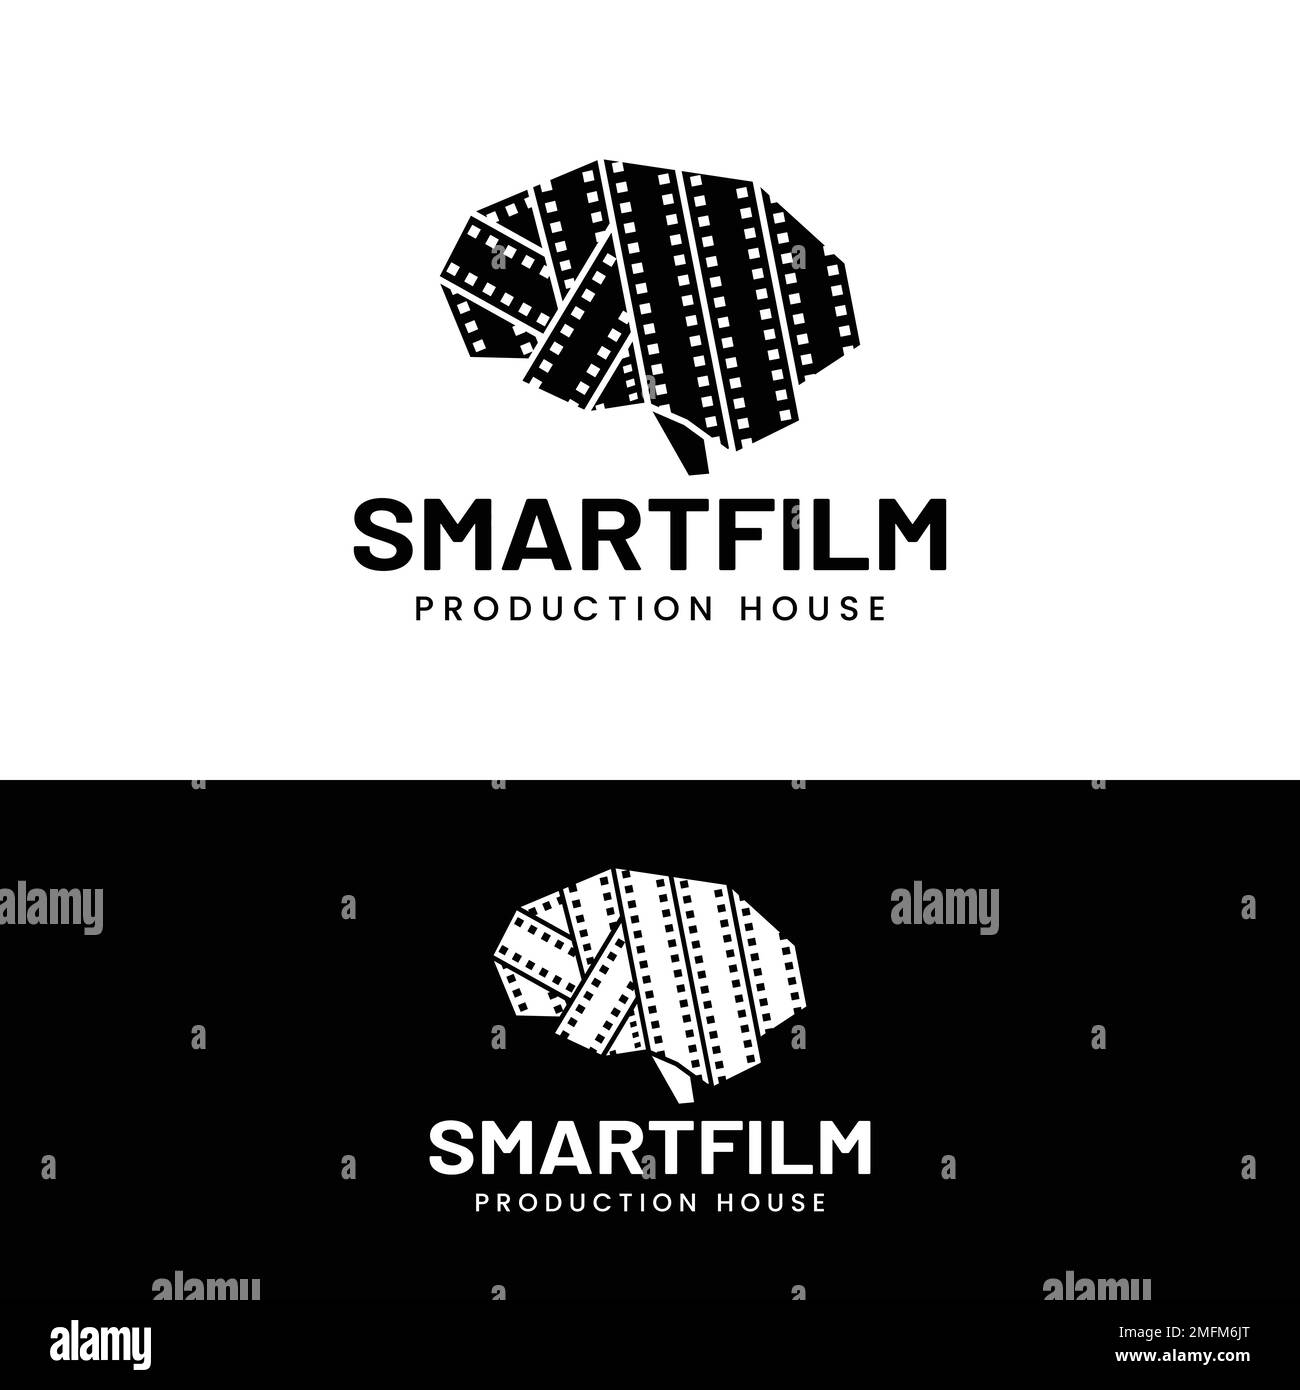 Smart Brain with Filmstrip Stripe Logo Design Template. Suitable for Cinematography Video Film Movie Production Studio Cinema Theater Industry Label Stock Vector